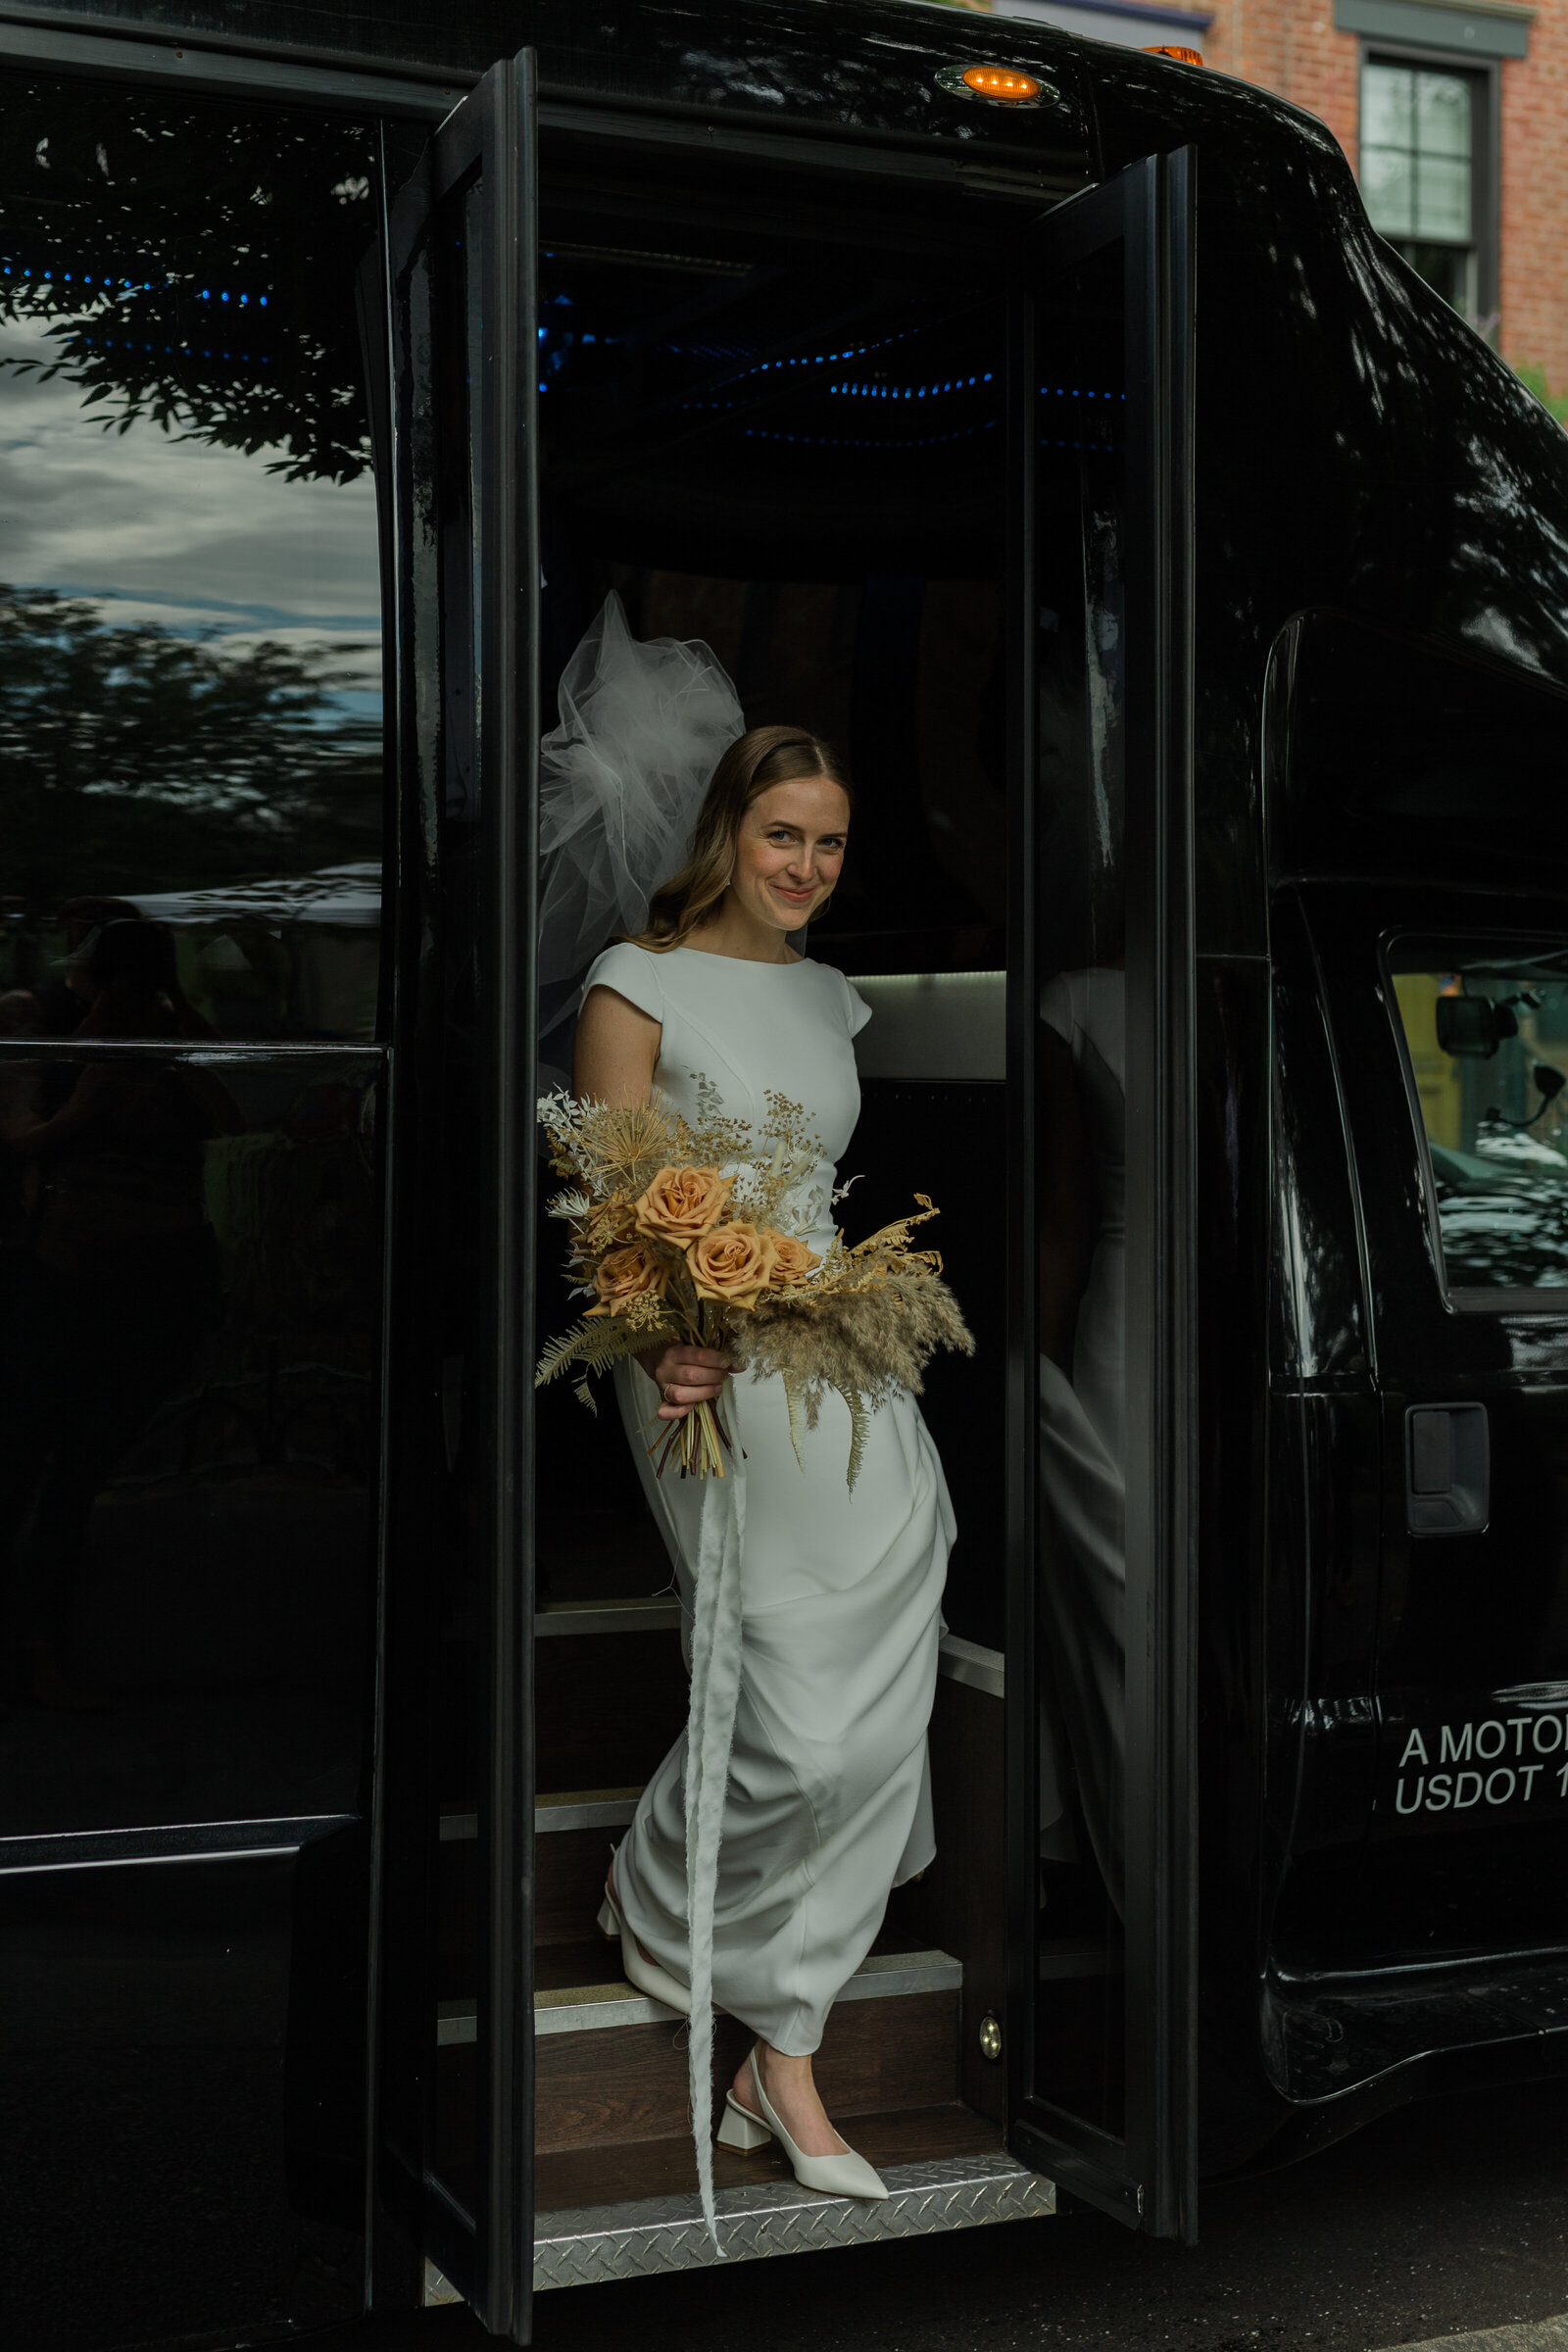 Bride gets out of the bus and looks happy